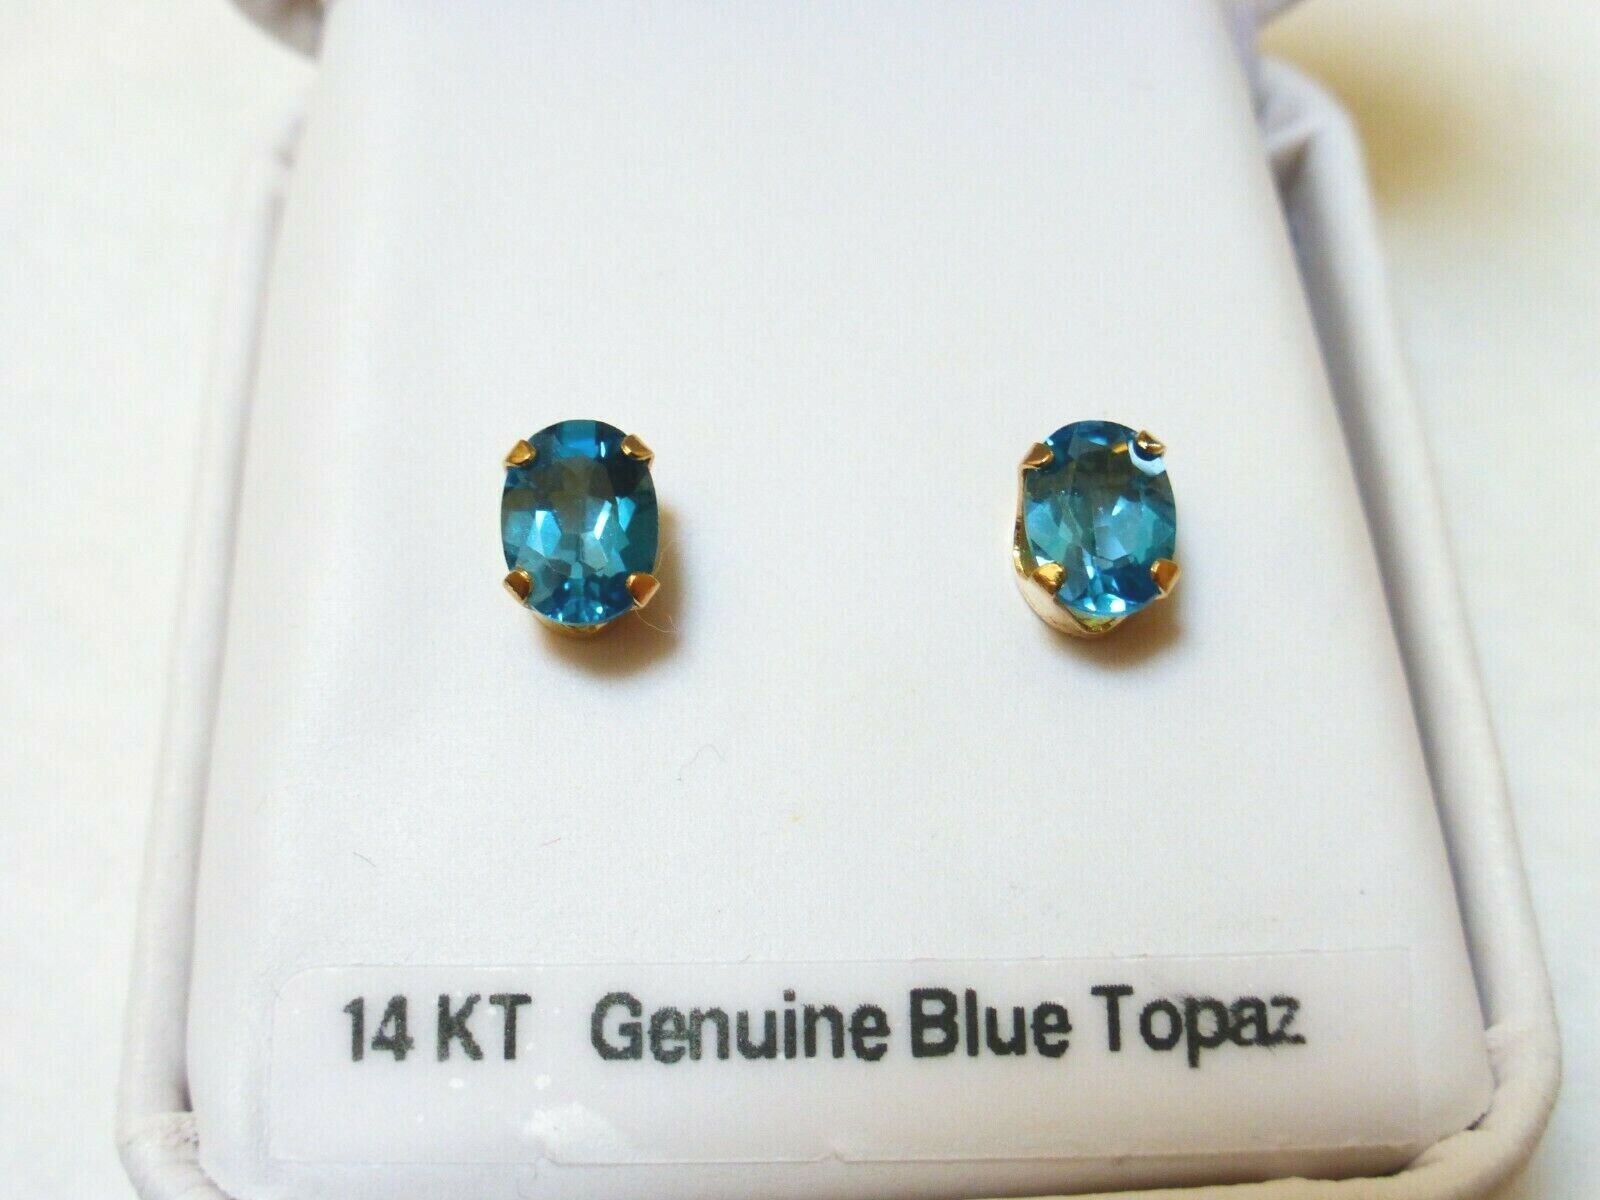 14K SOLID YELLOW GOLD GENUINE BLUE TOPAZ EARRINGS - image 6